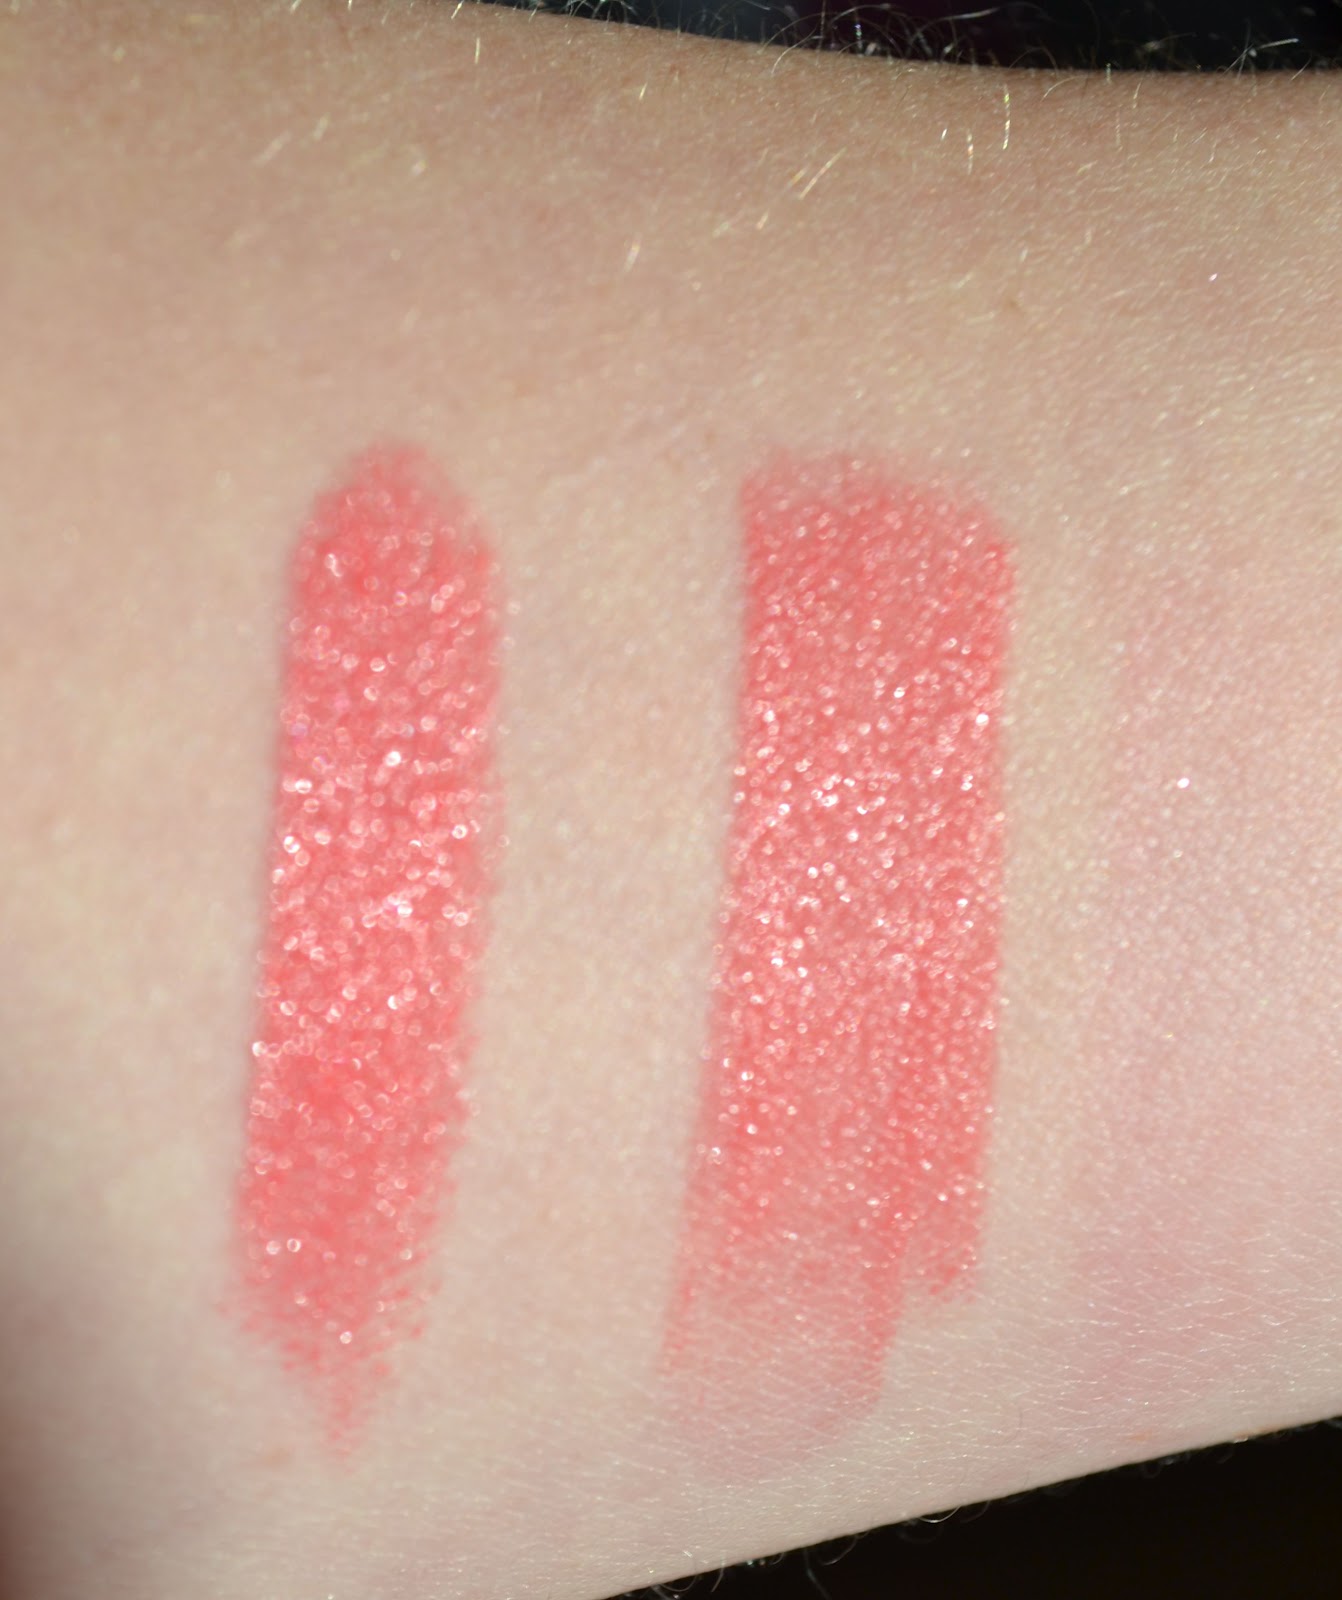 From Left: Mac Watch Me Simmer, Lancome Rose Boudoir.